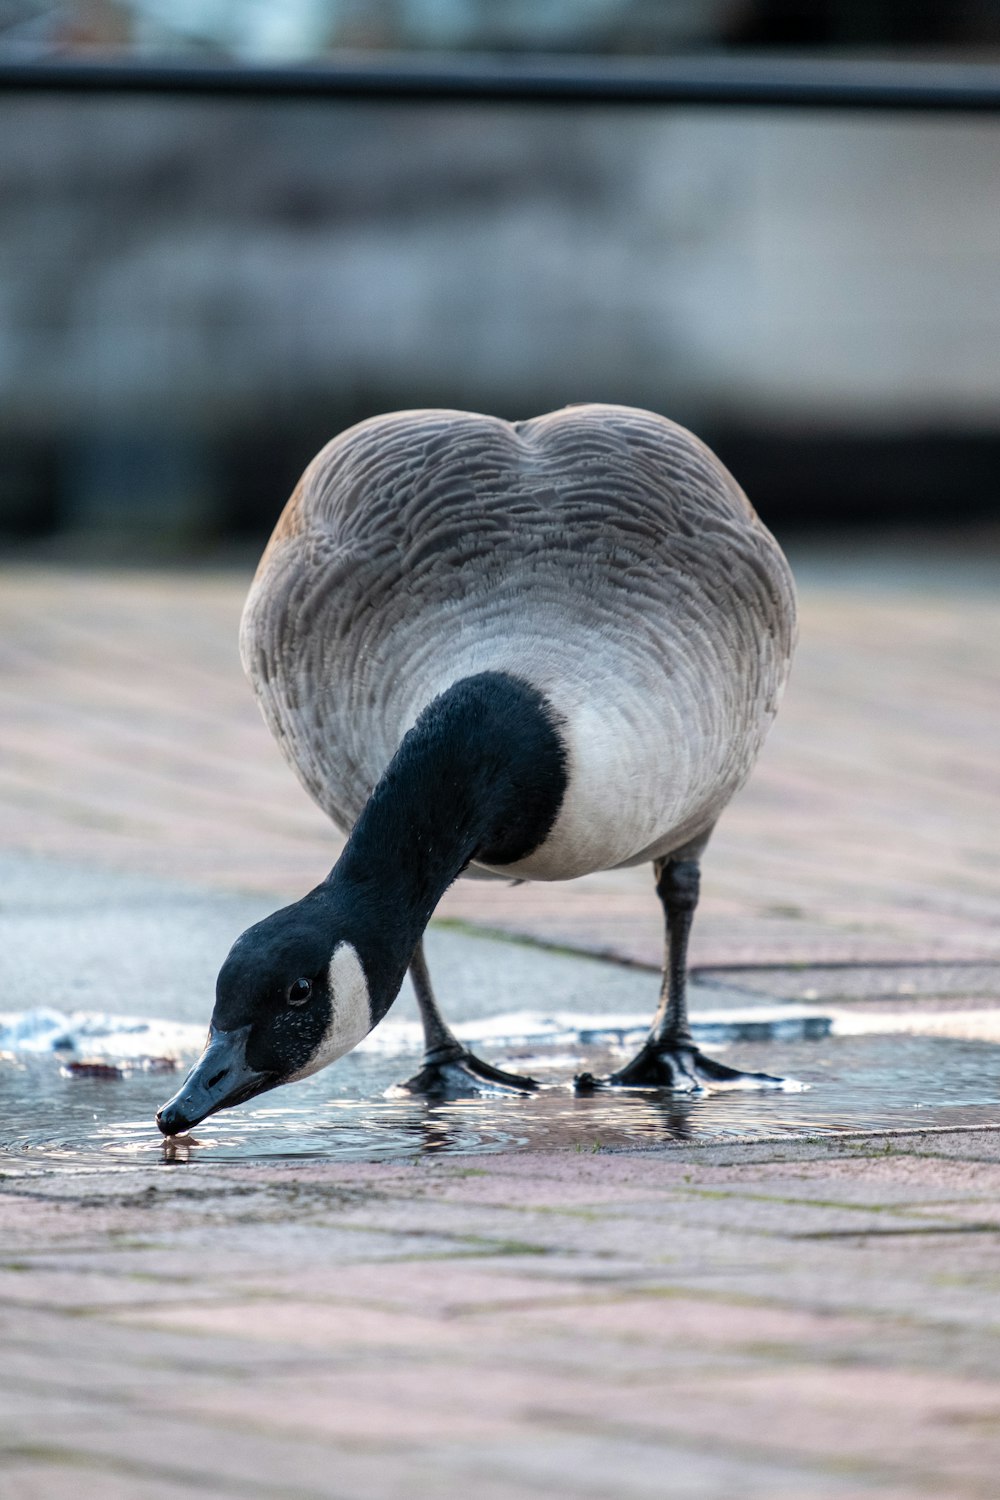 a goose is drinking water from a puddle